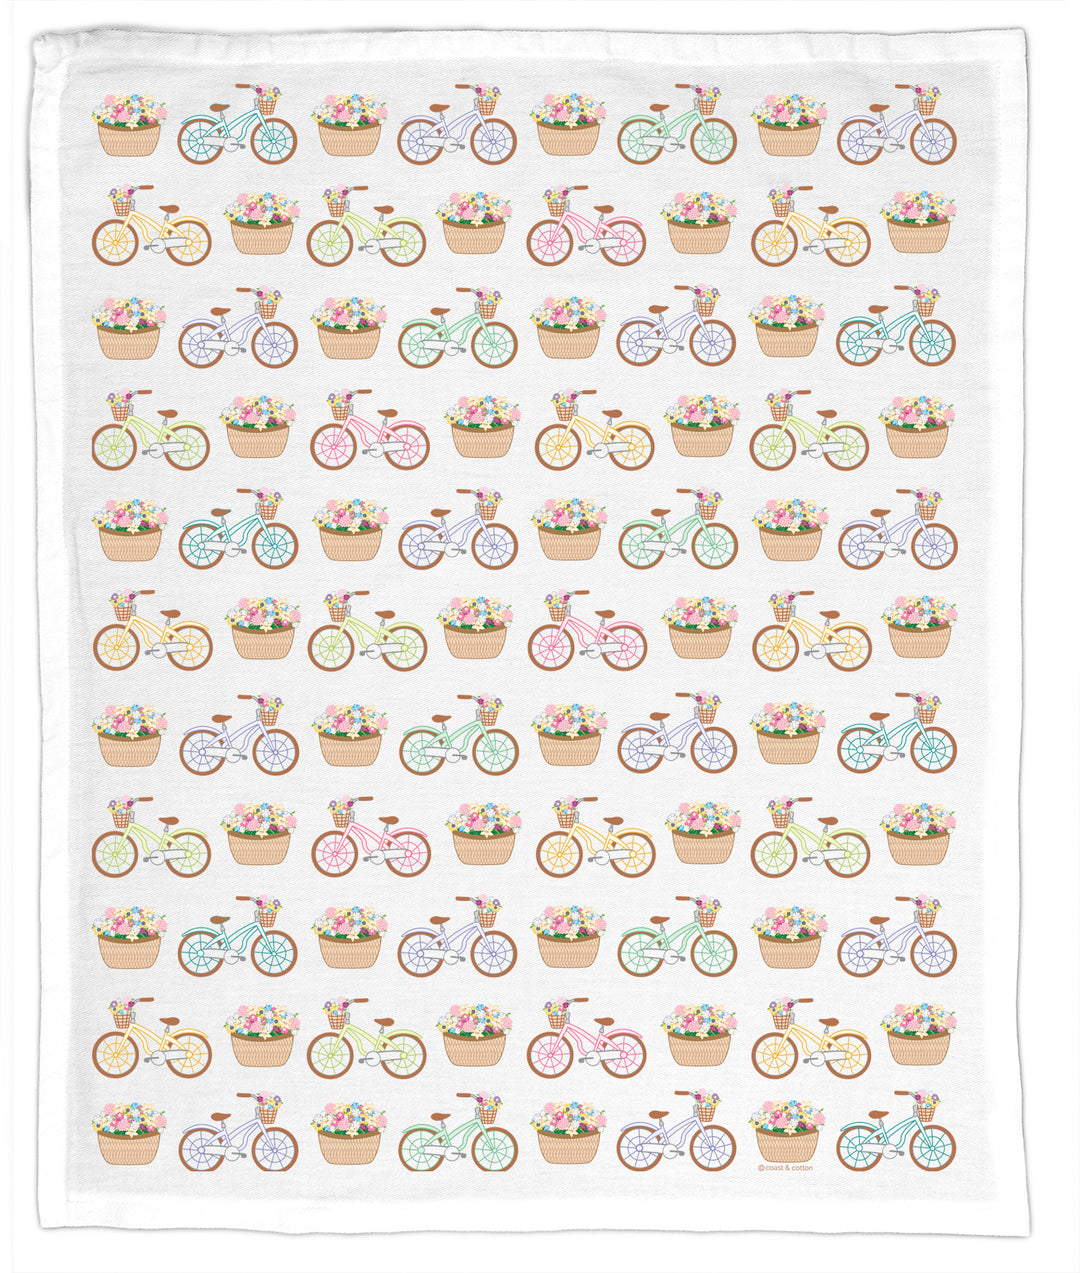 Bicycles & Flower Baskets, Hand Towel